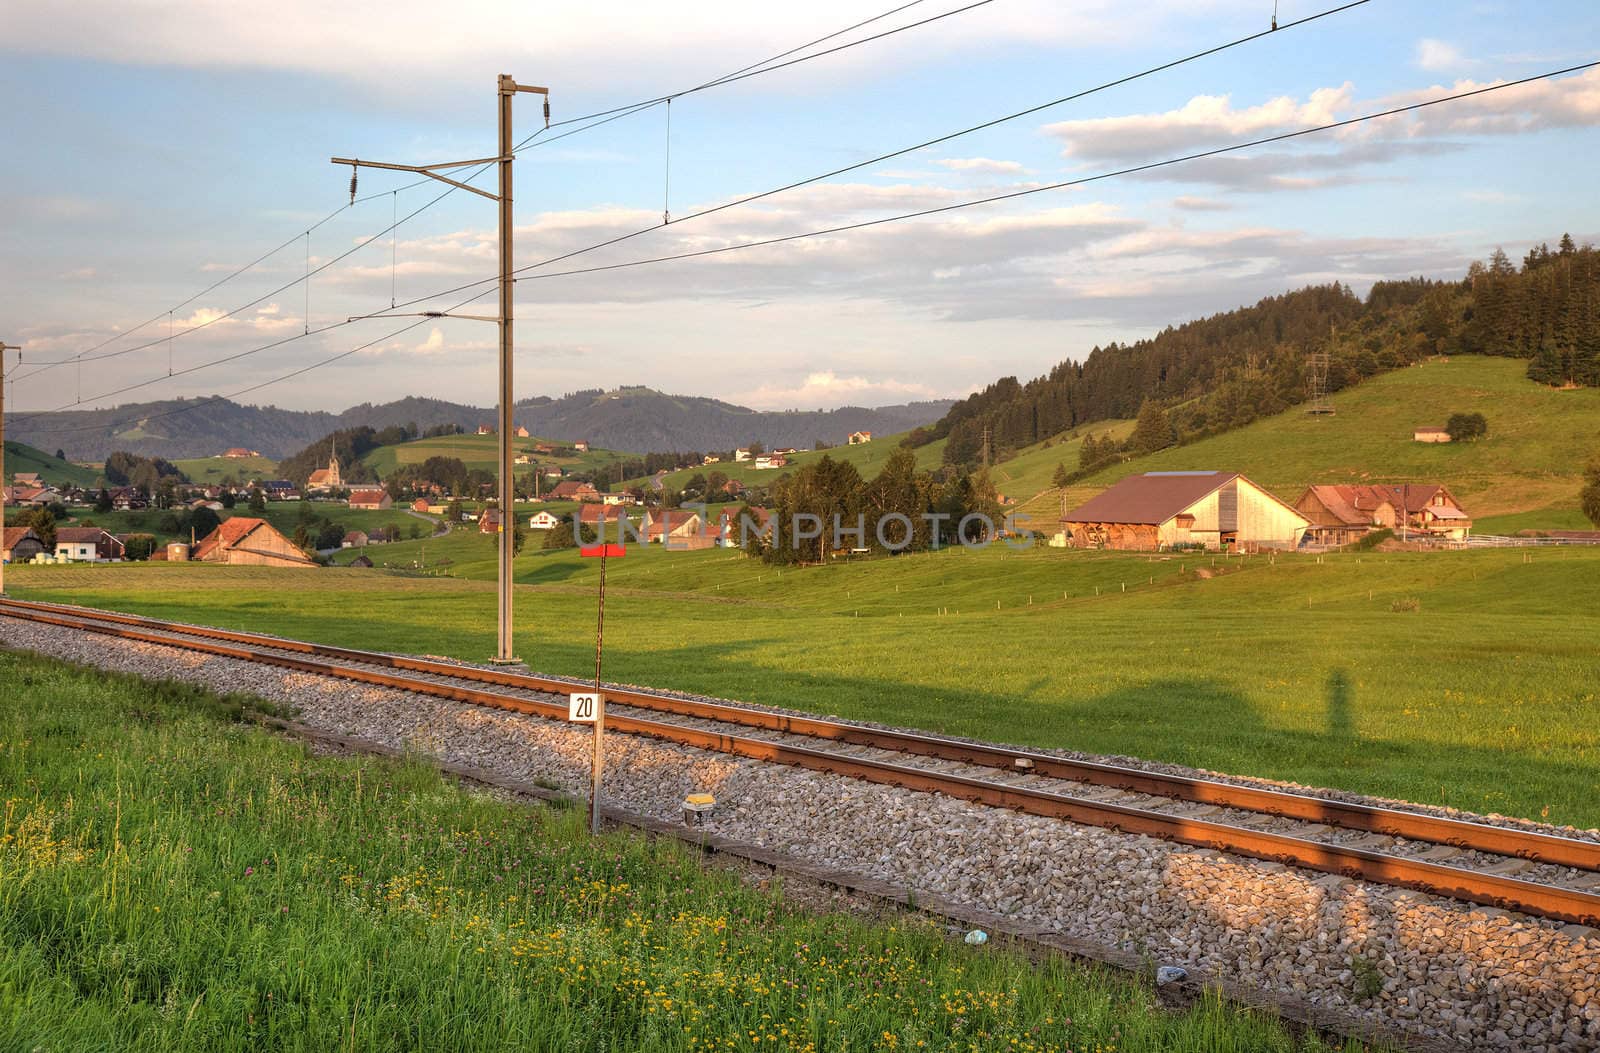 Railroad in swiss Alps before sunset. by borodaev